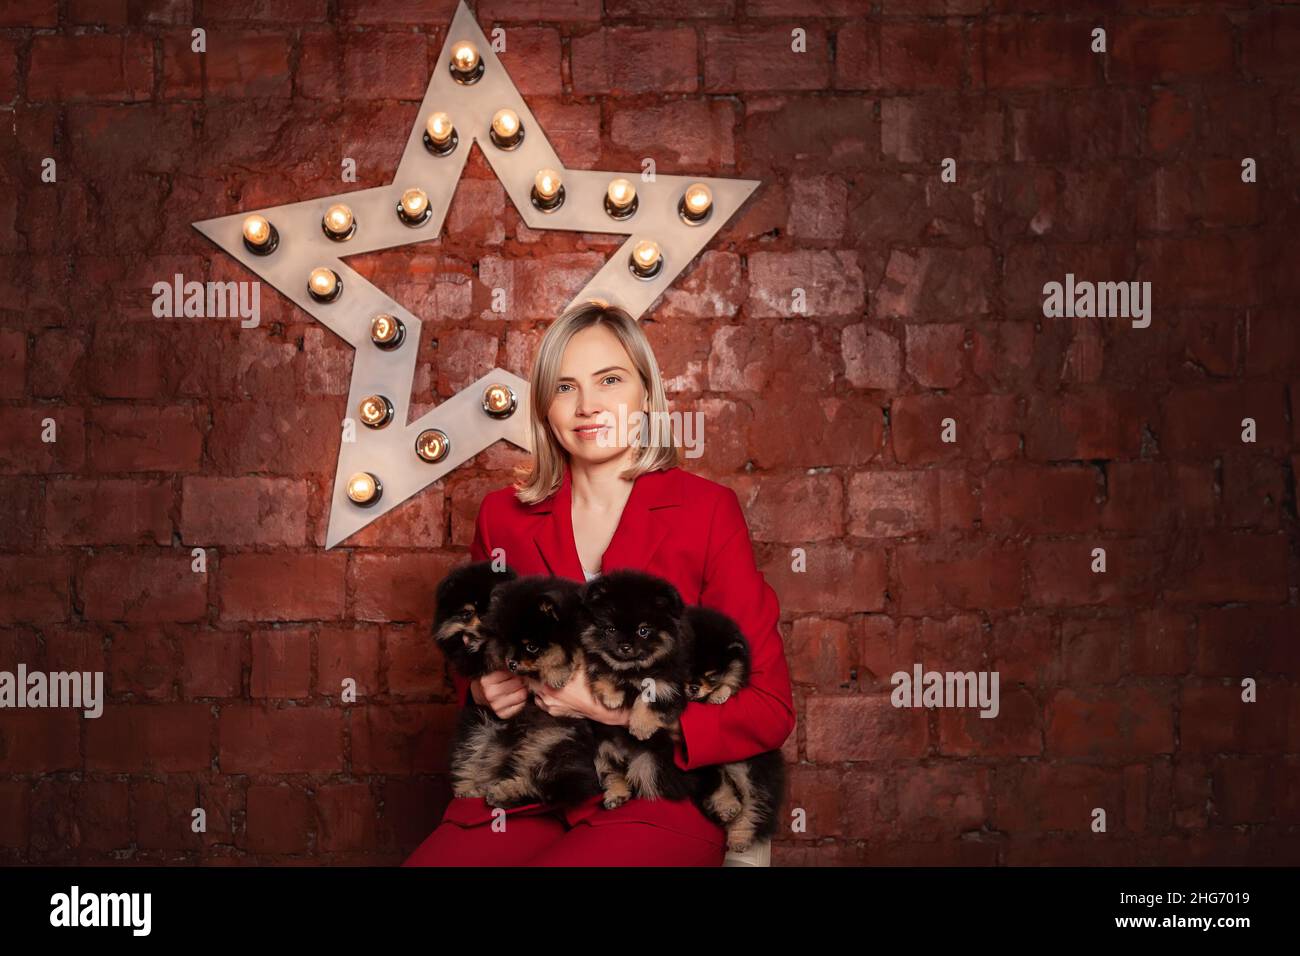 Smiling pretty business woman in red jacket holding cute puppies of pomeranian spitz breed dog. Owner or breeder with litter of puppies. Stock Photo